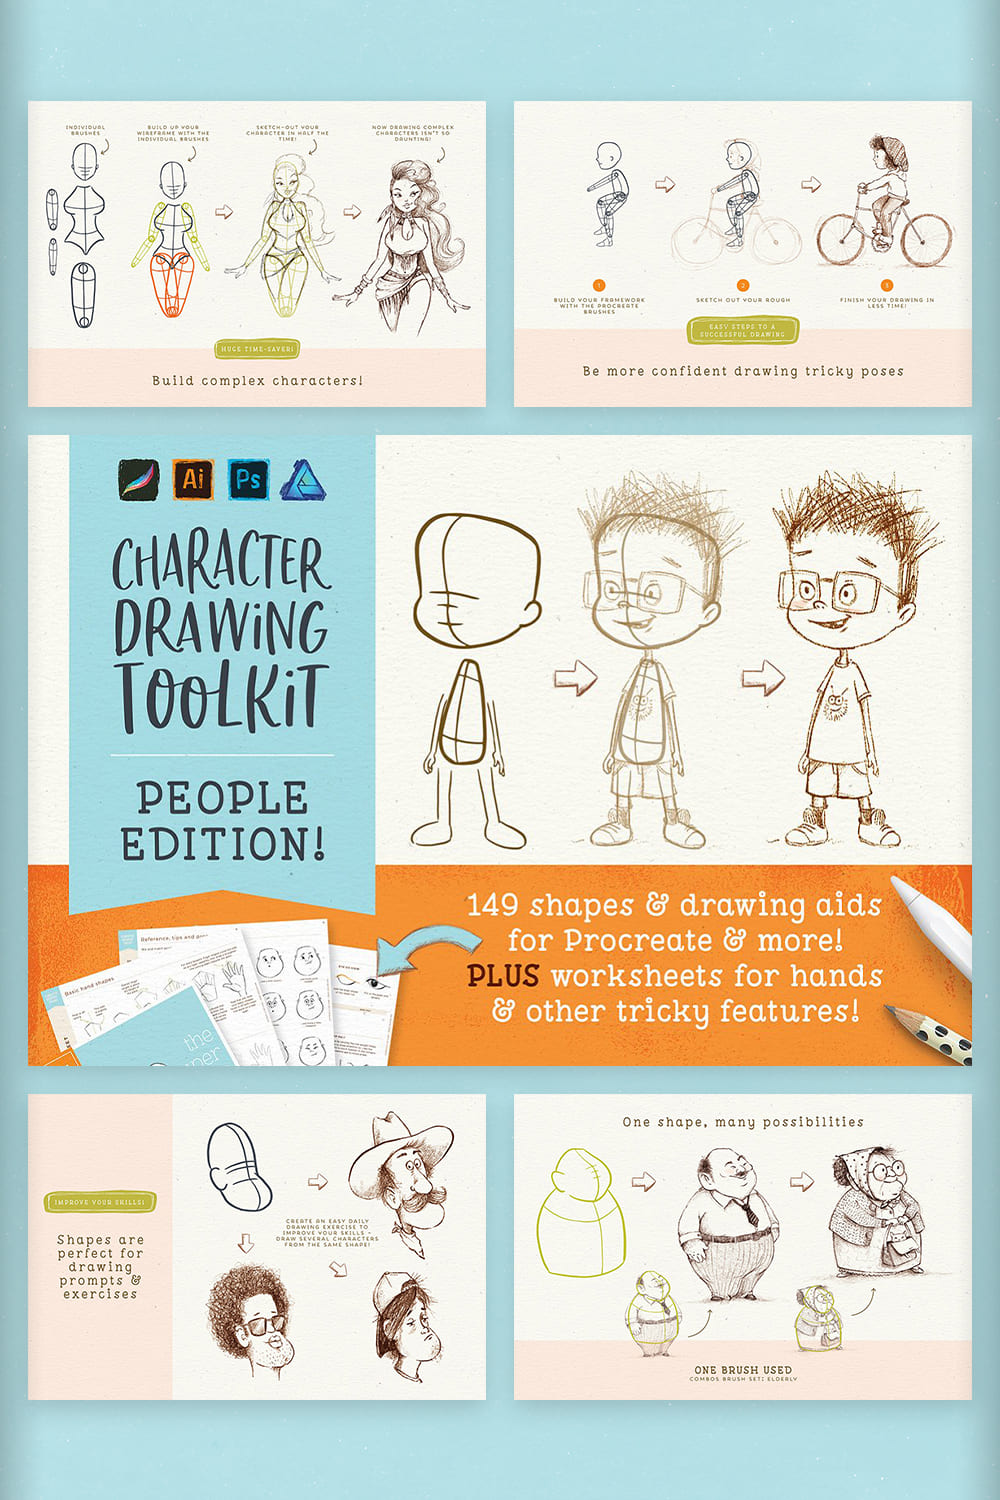 procreate character drawing toolkit pinterest image.